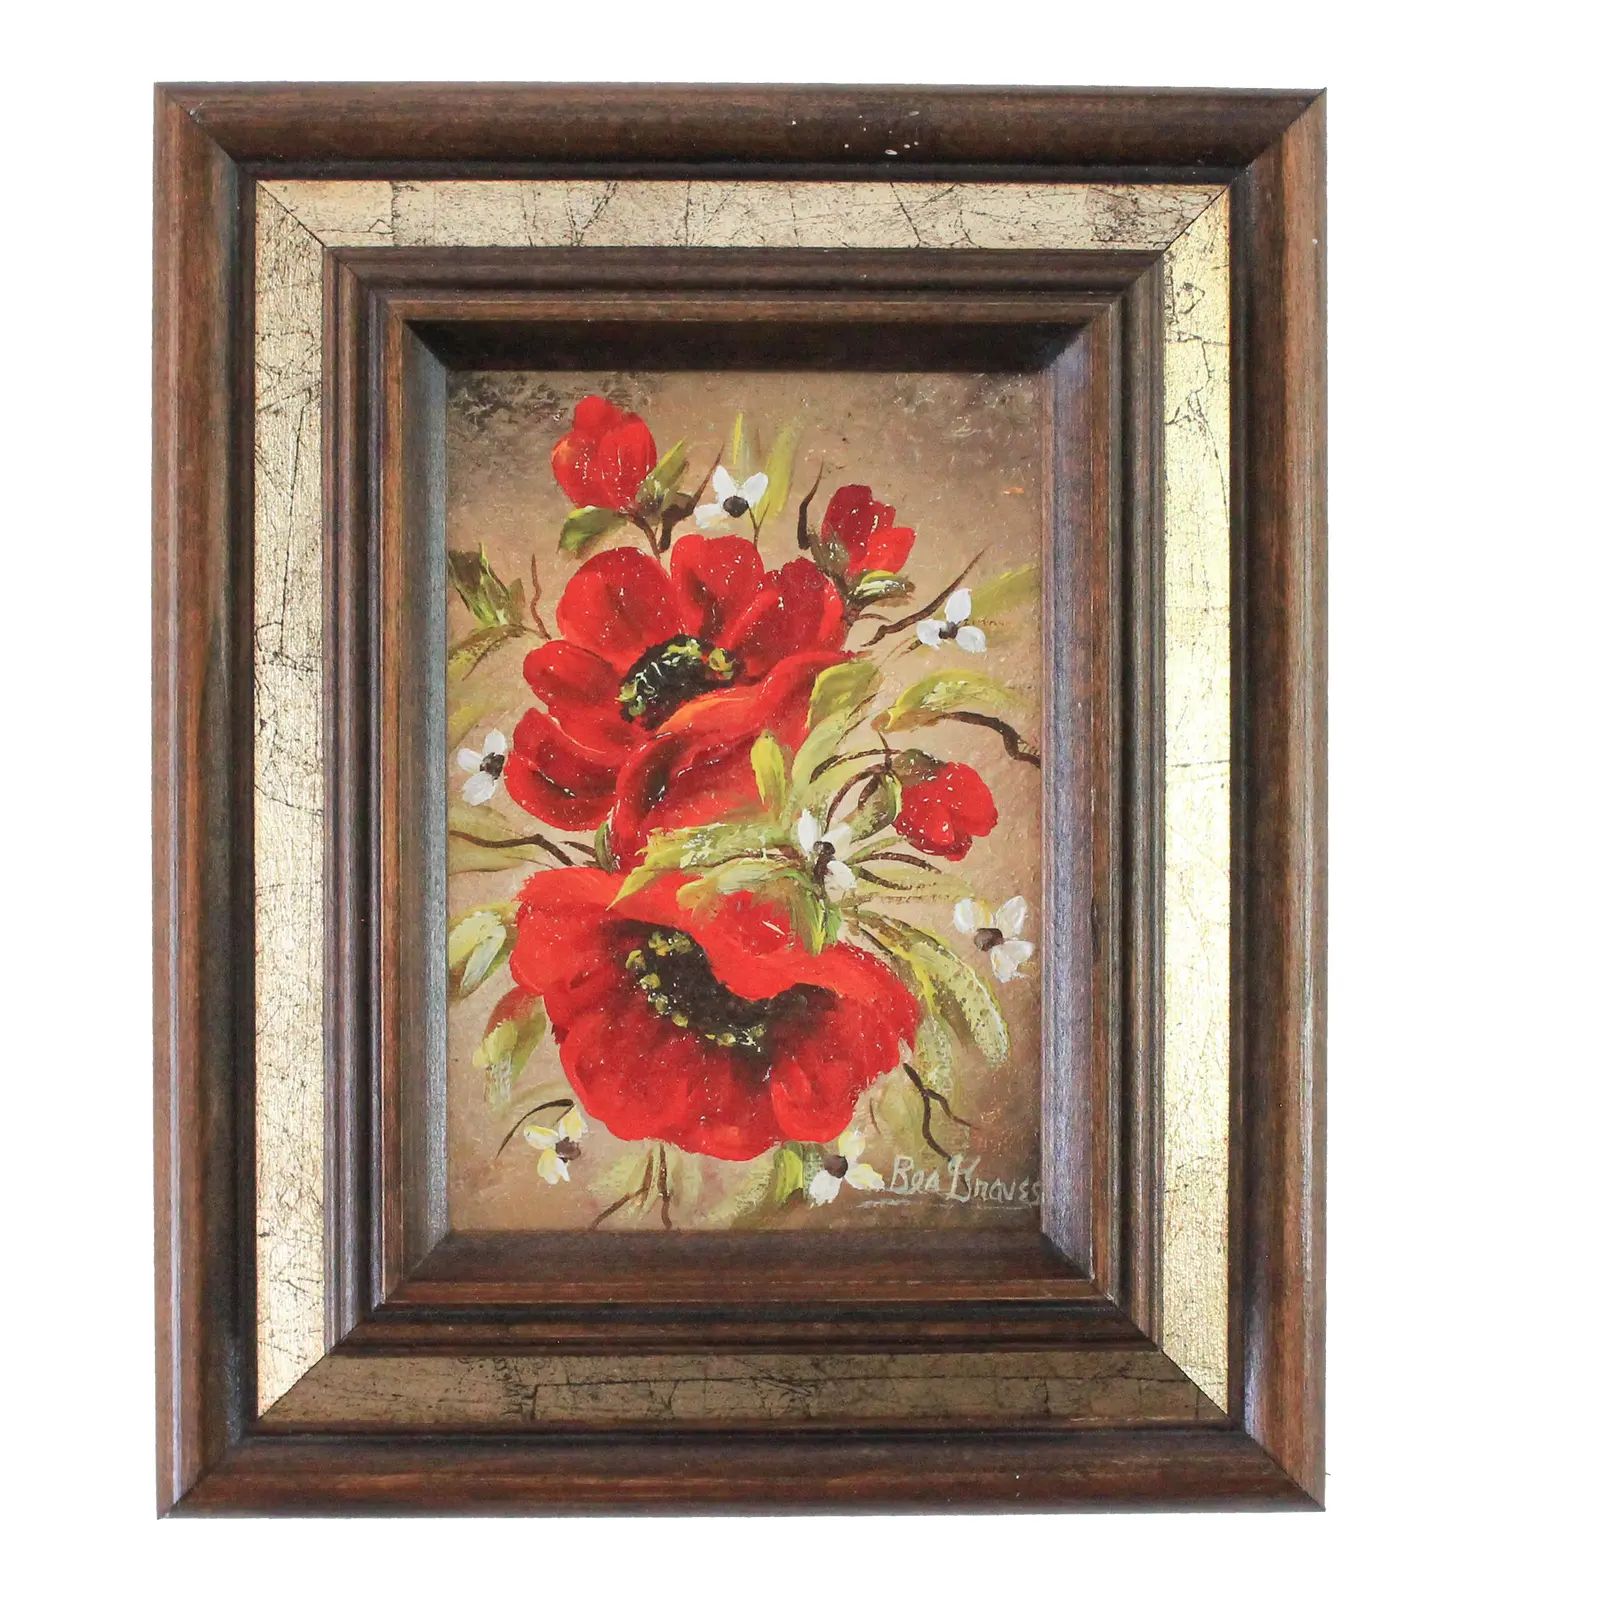 Framed Vintage Floral Painting | Chairish